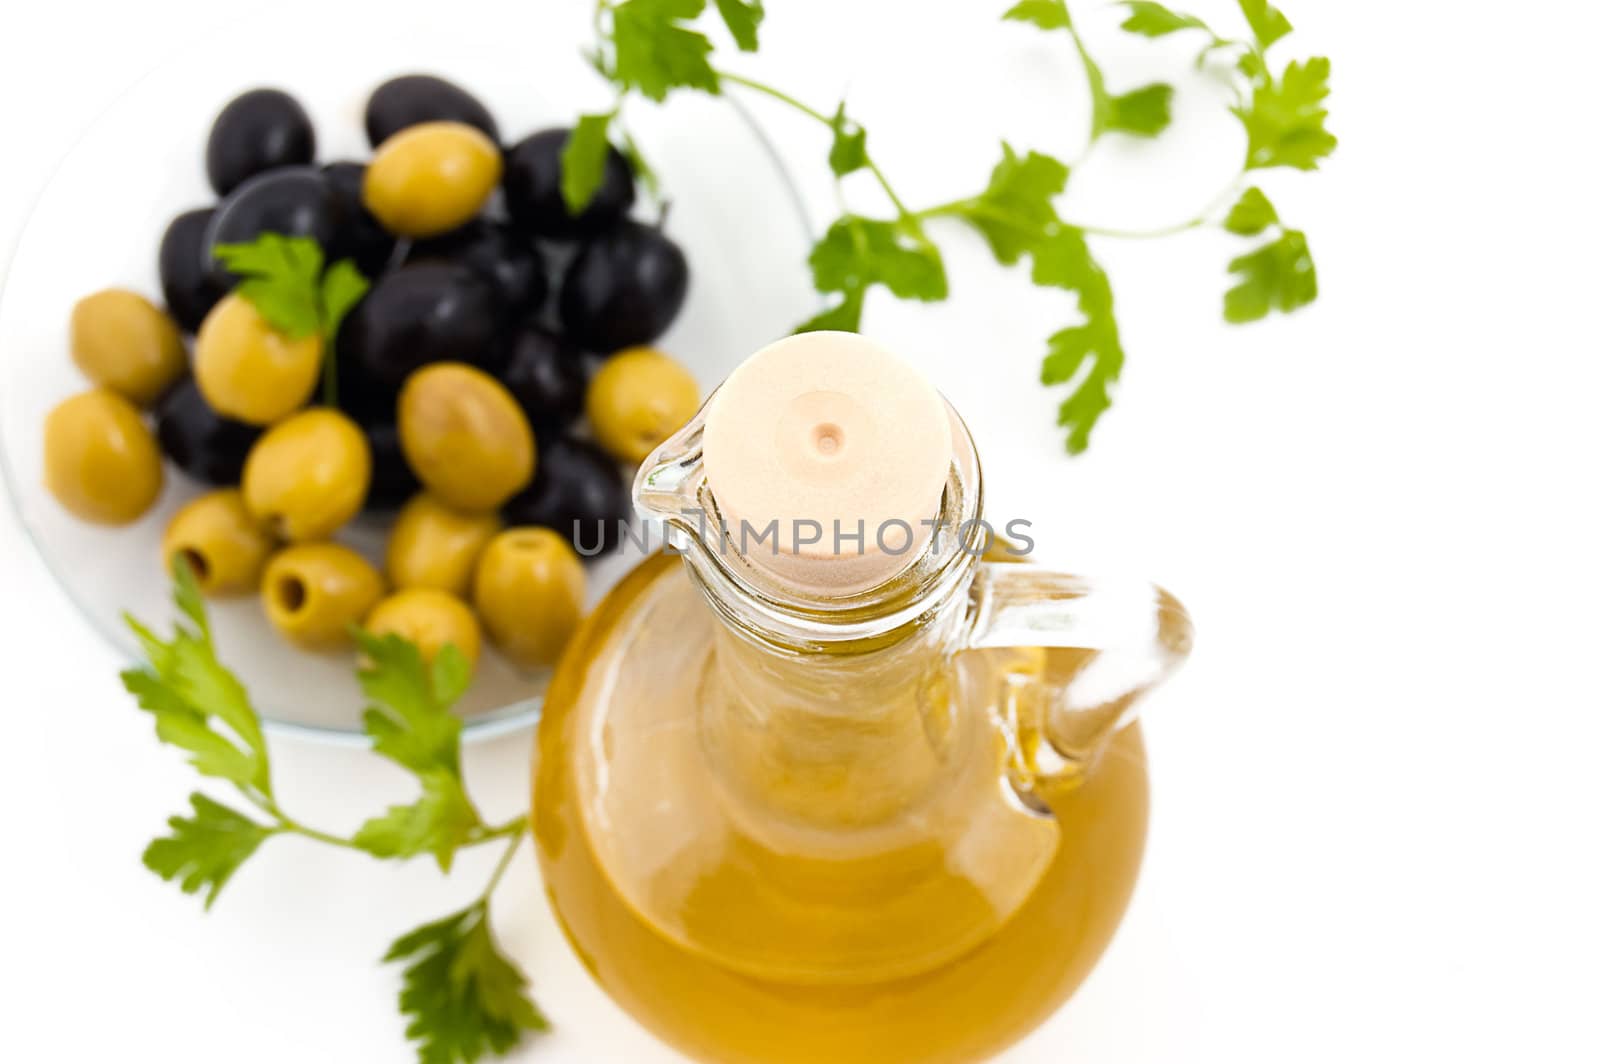 Olives and oil jug with greens on white, focus on cork